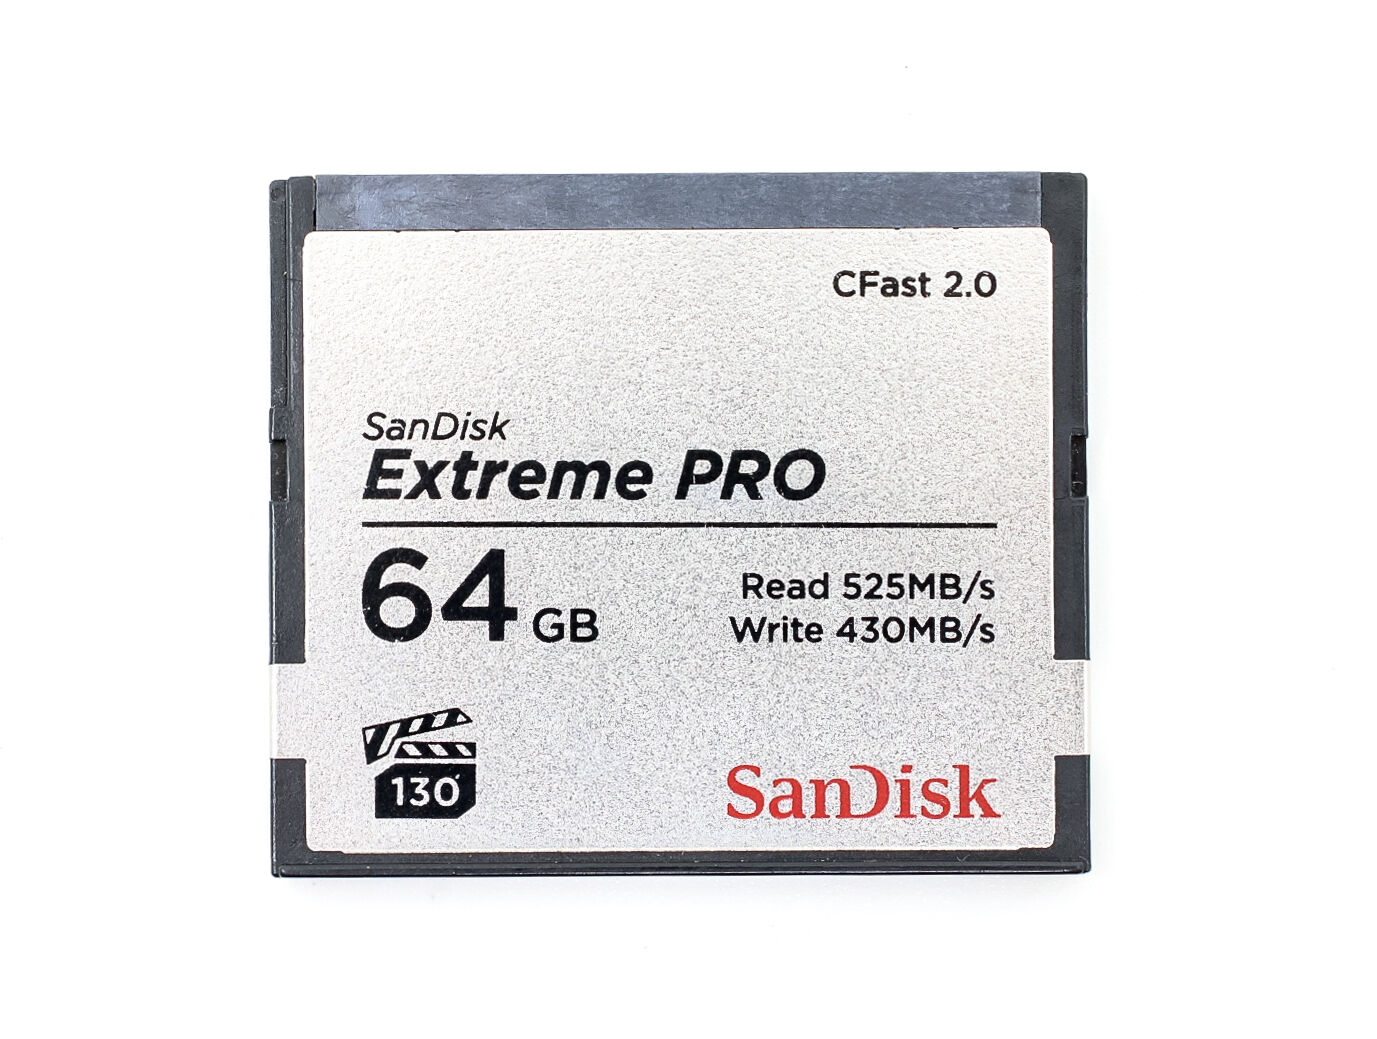 sandisk extreme pro 64gb 525mb/s cfast 2.0 card (condition: excellent)